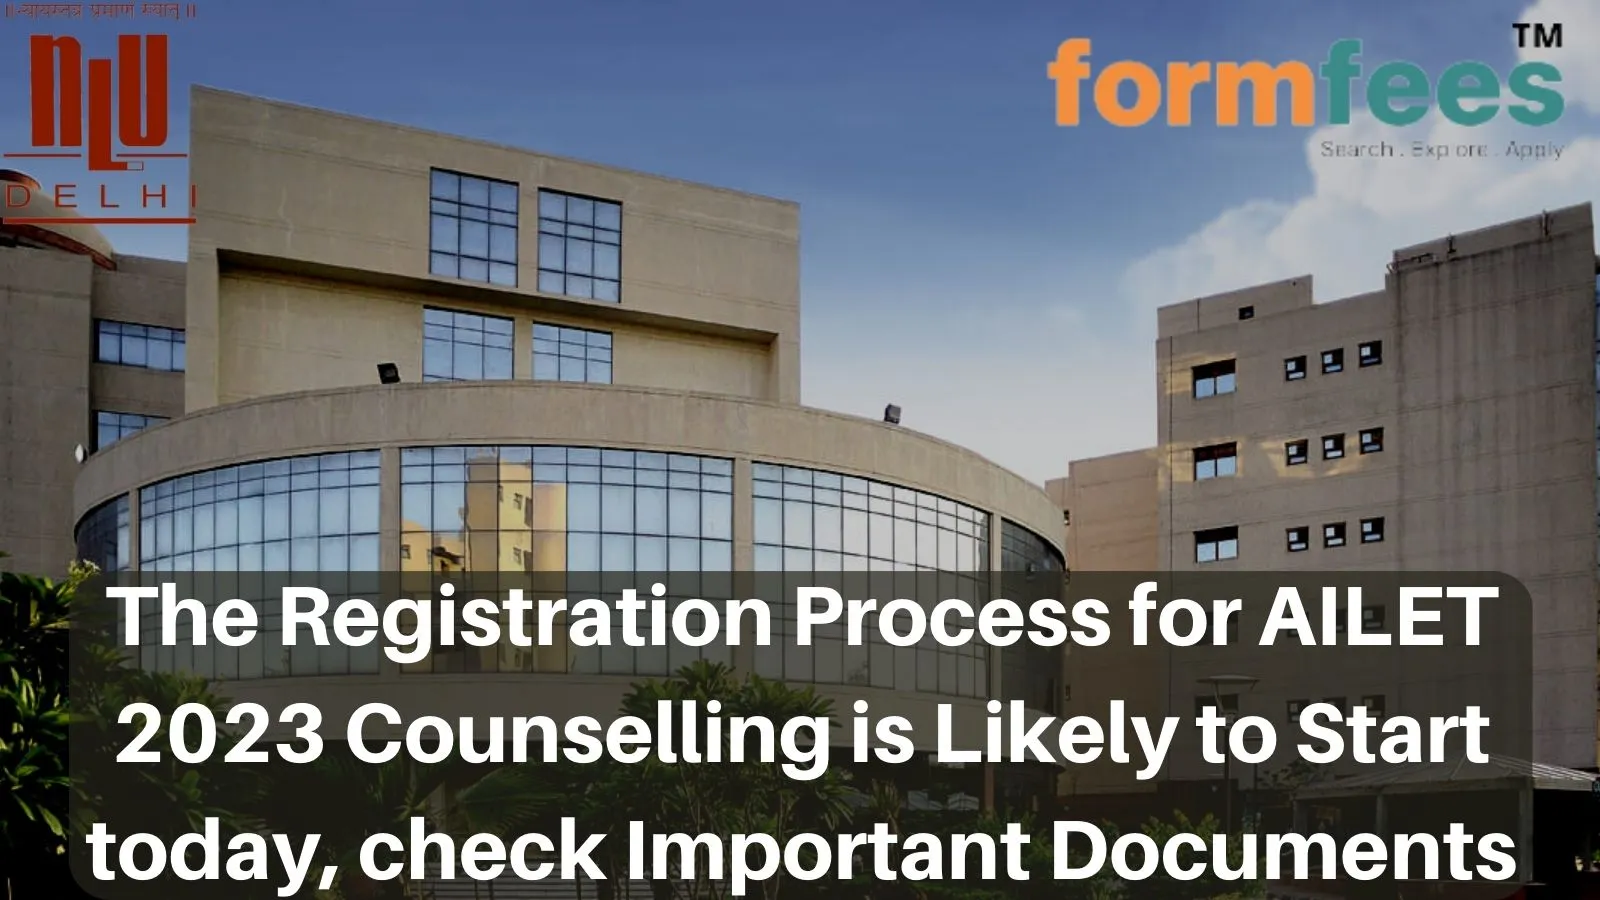 The Registration Process for AILET 2023 Counselling is Likely to Start today, check Important Documents